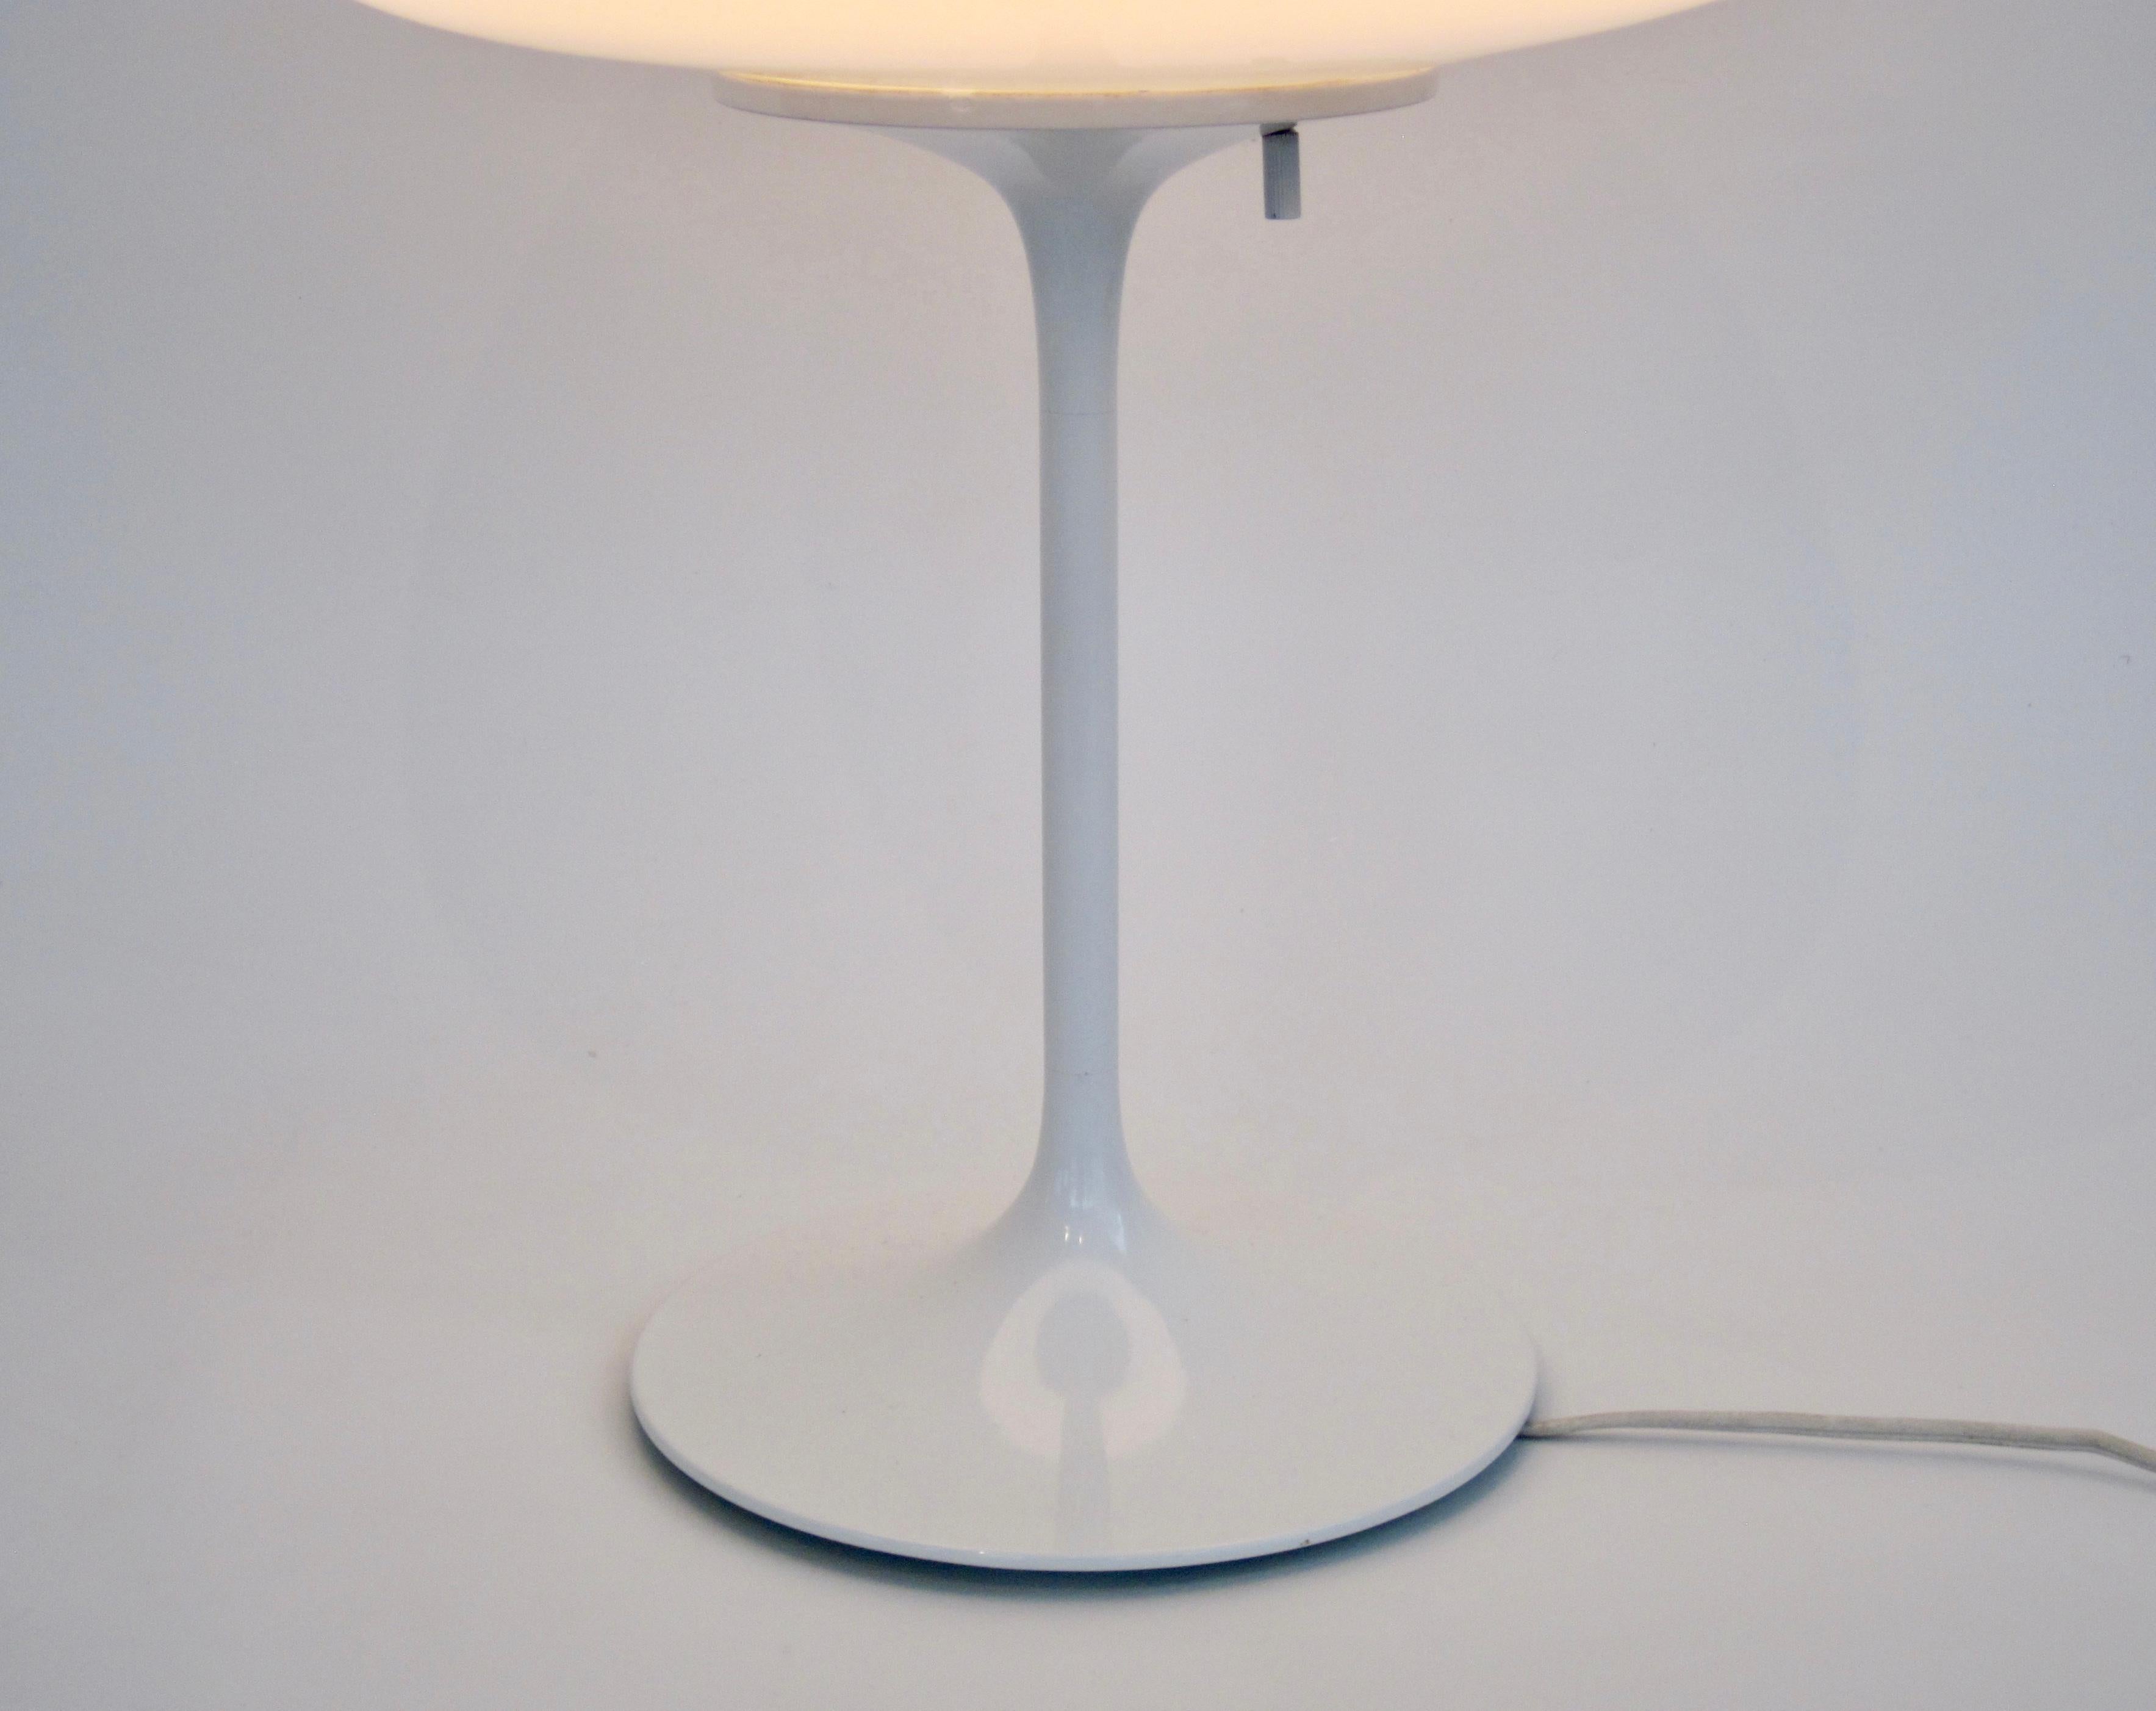 Bill Curry for Design Line Mushroom Top Stemlite Table Lamp In Good Condition For Sale In Ferndale, MI